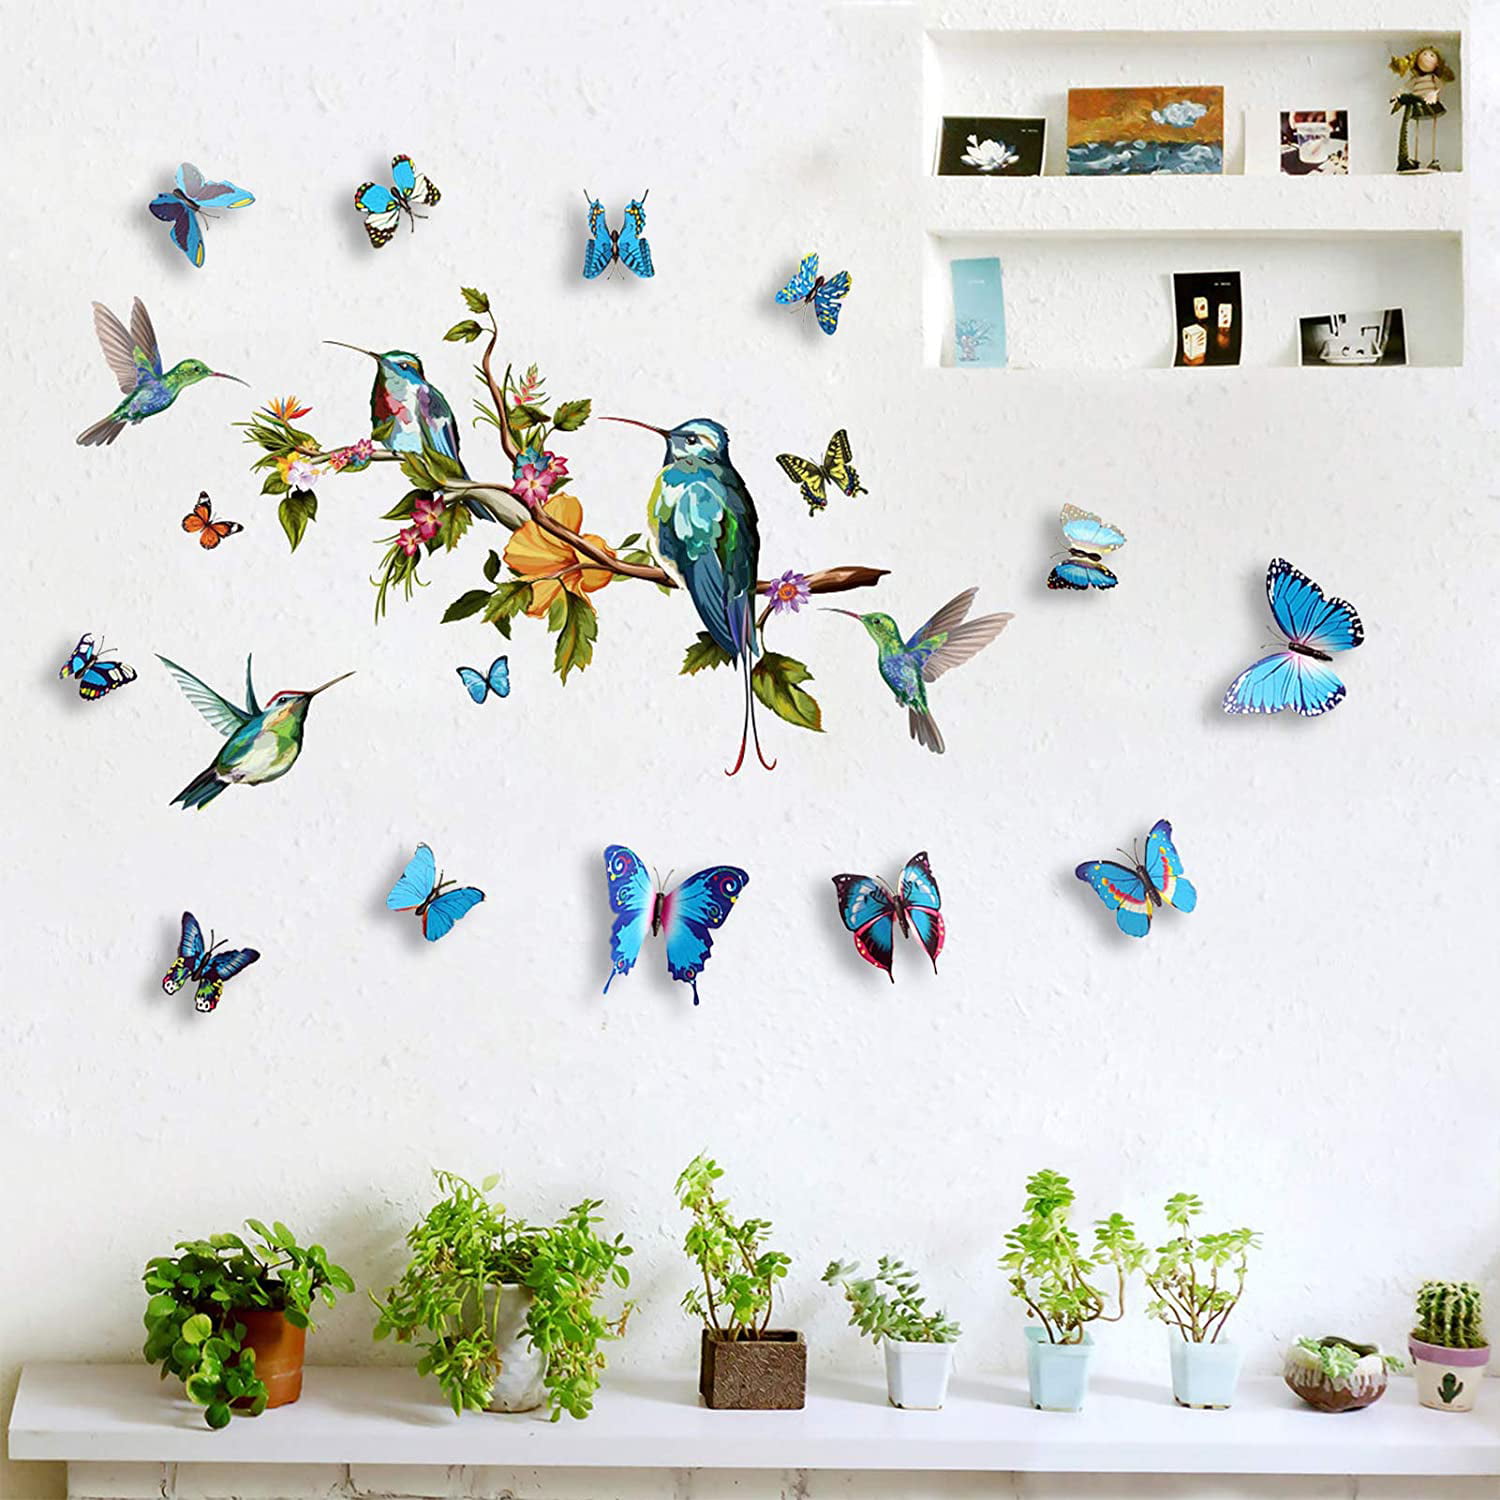 Hummingbird Wall Decals with 12 PCS 3D Colorful Butterfly Wall Stickers for Home Bedroom Removable Watercolor Birds on Tree Branch Wall Art Mural Decor Home Decorations for Living Room Bedroom